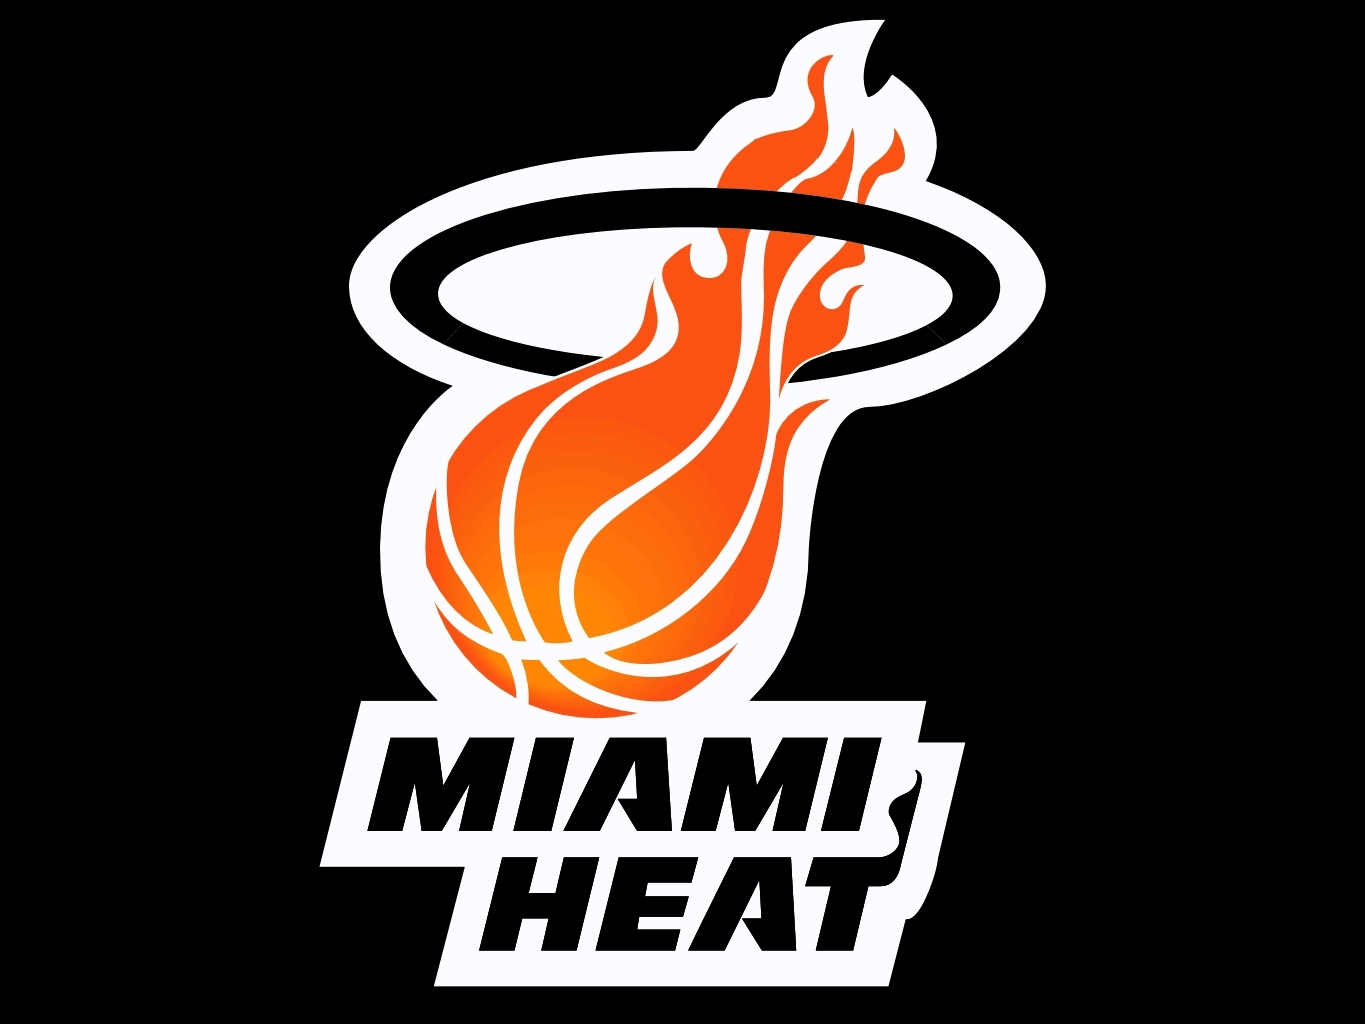 The Miami Heat Has Decided To Heat NBA With VERT's Player Tracking Technology